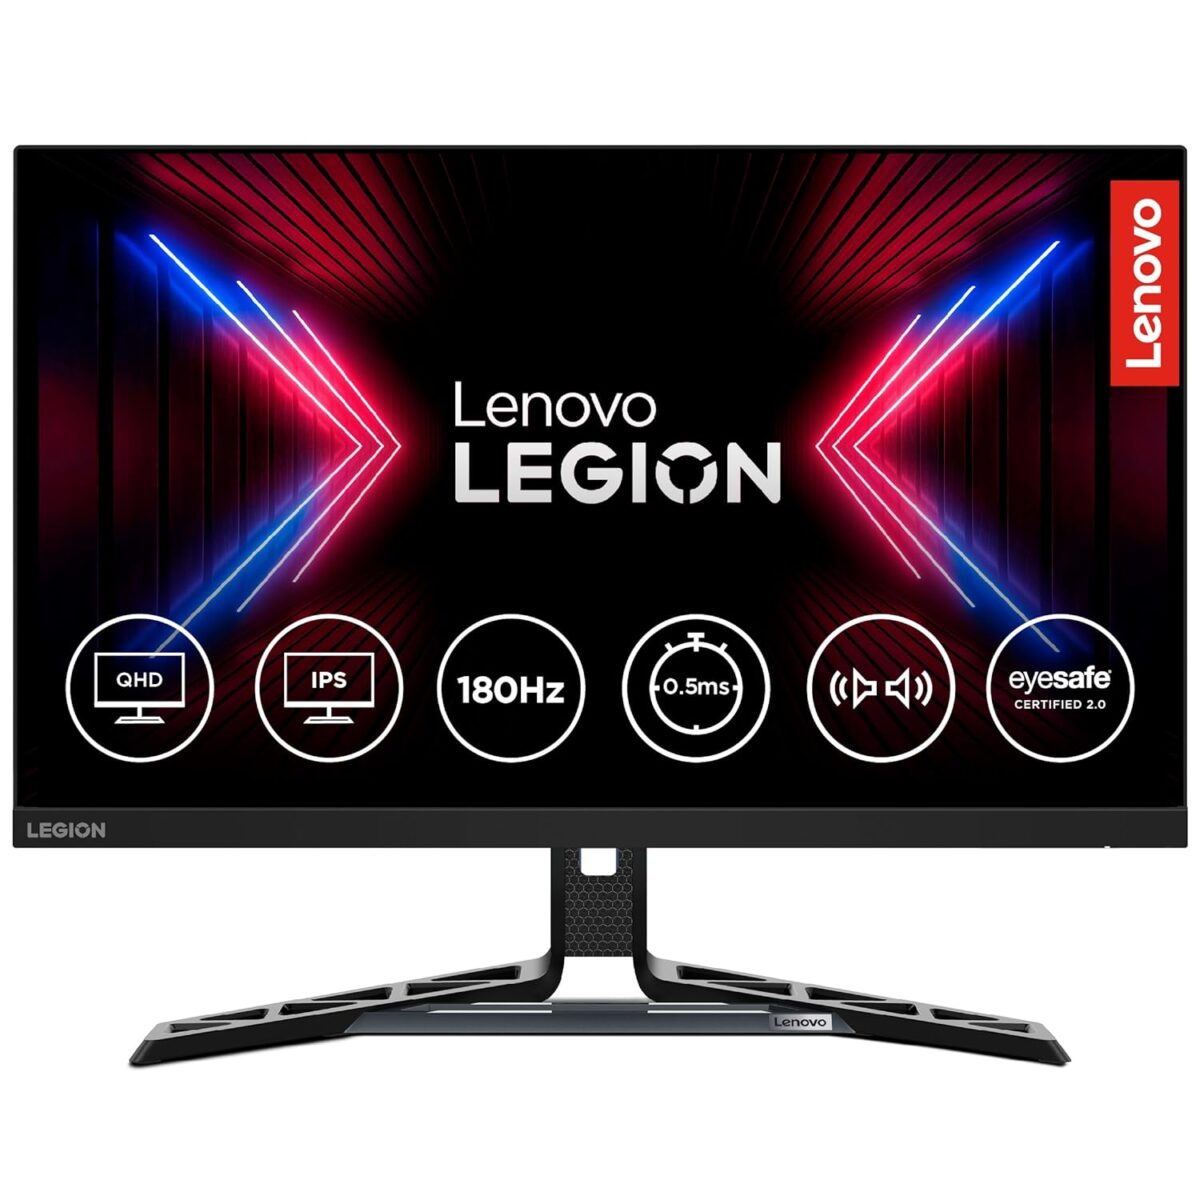 Lenovo Legion R27q-30 67B4GAC1IN Monitor Launched in India | Check Price, Specs